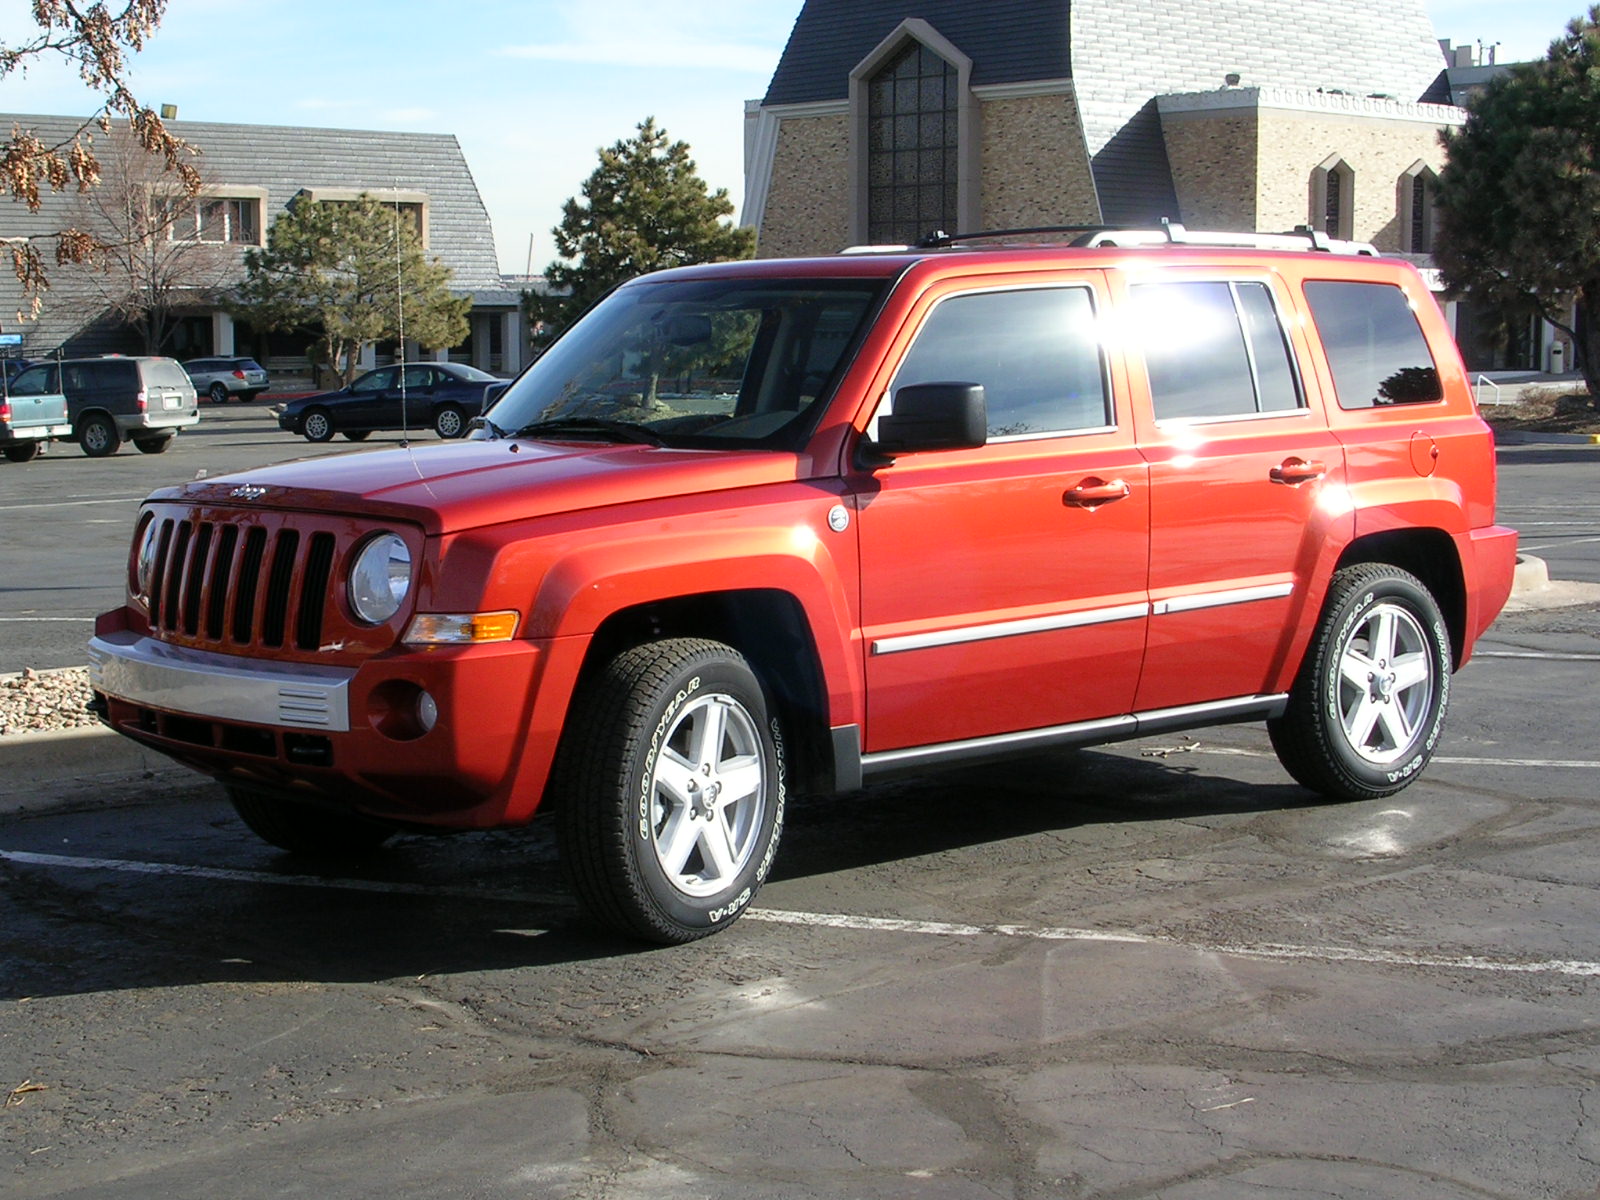 Compare jeep patriot and liberty #4